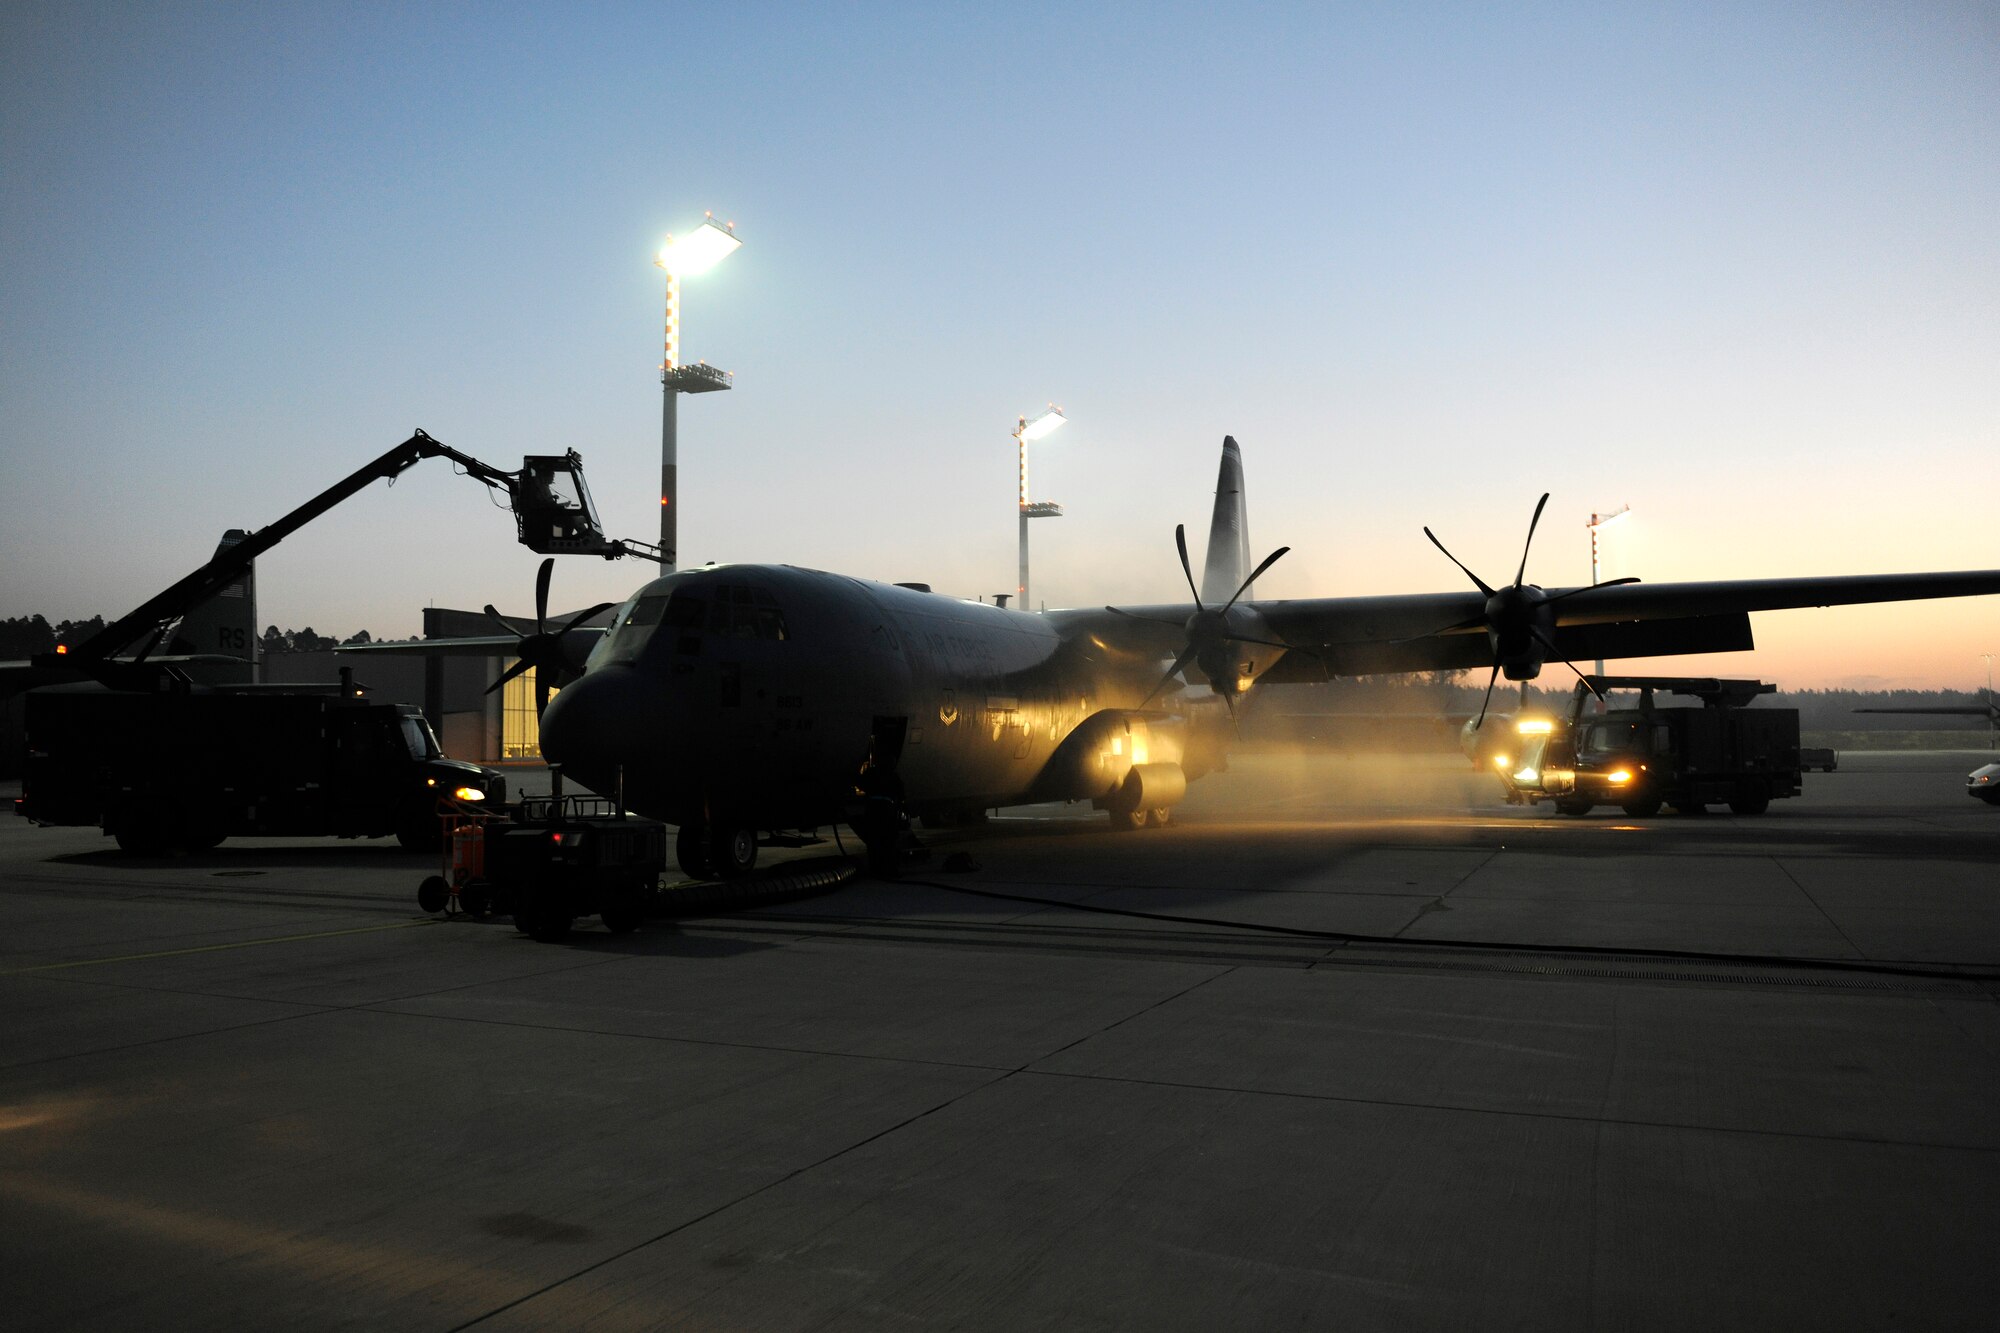 A C-130J receives a de-icing before the 37th Airlift Squadron completes a week-long training exercise with a ten-bundle container deployment system drop, March 16, 2012 at Ramstein Air Base, Germany.  The cargo was dropped in order to support field-training exercises for the 173rd Airborne Brigade Combat Team from Vicenza, Italy. This training gave pilots and loadmasters here an opportunity to practice this type of airdrop.  (U.S. Air Force photo/Staff Sgt. Chris Willis)